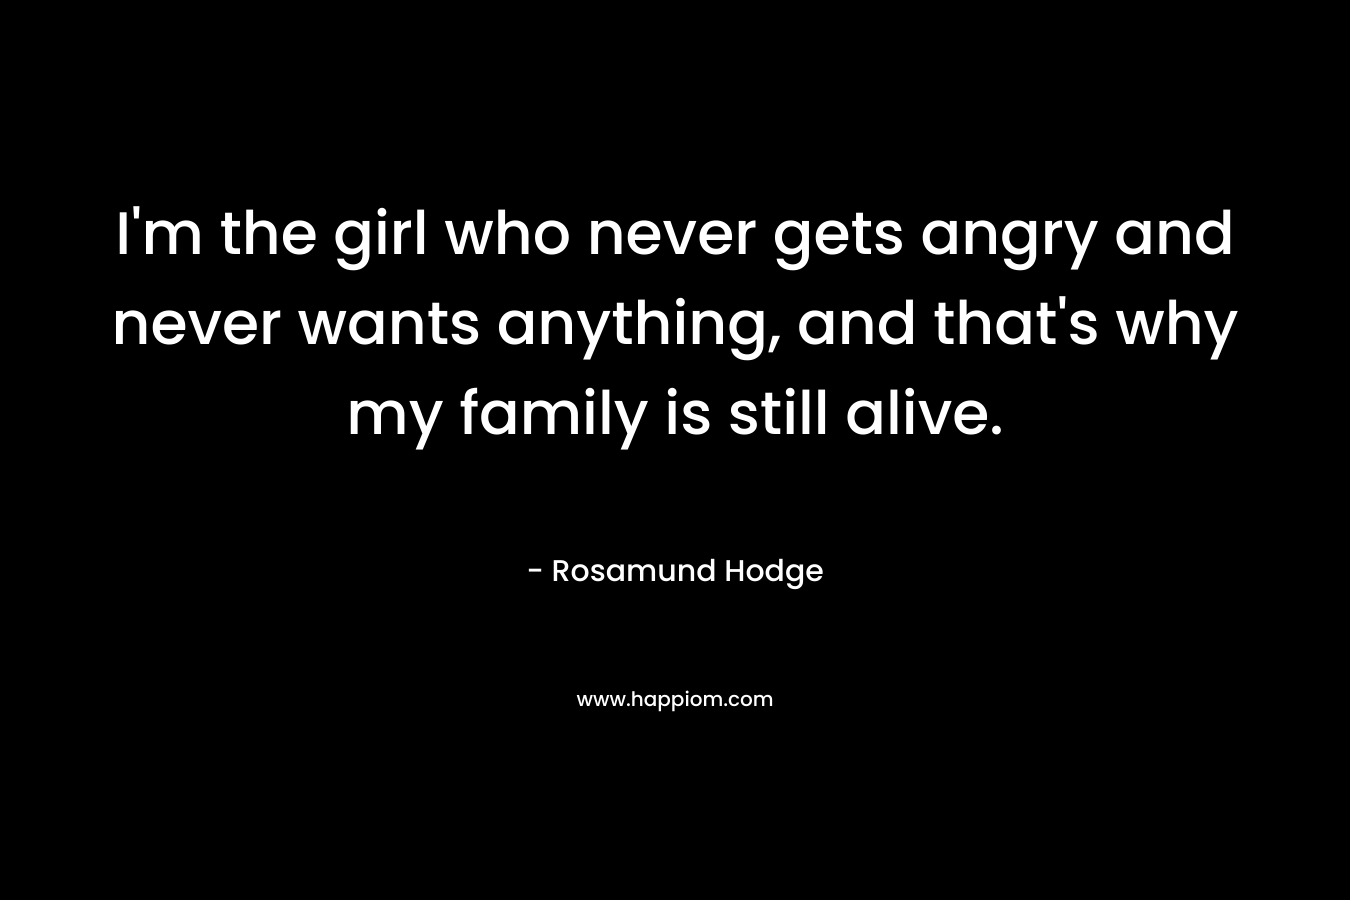 I'm the girl who never gets angry and never wants anything, and that's why my family is still alive.